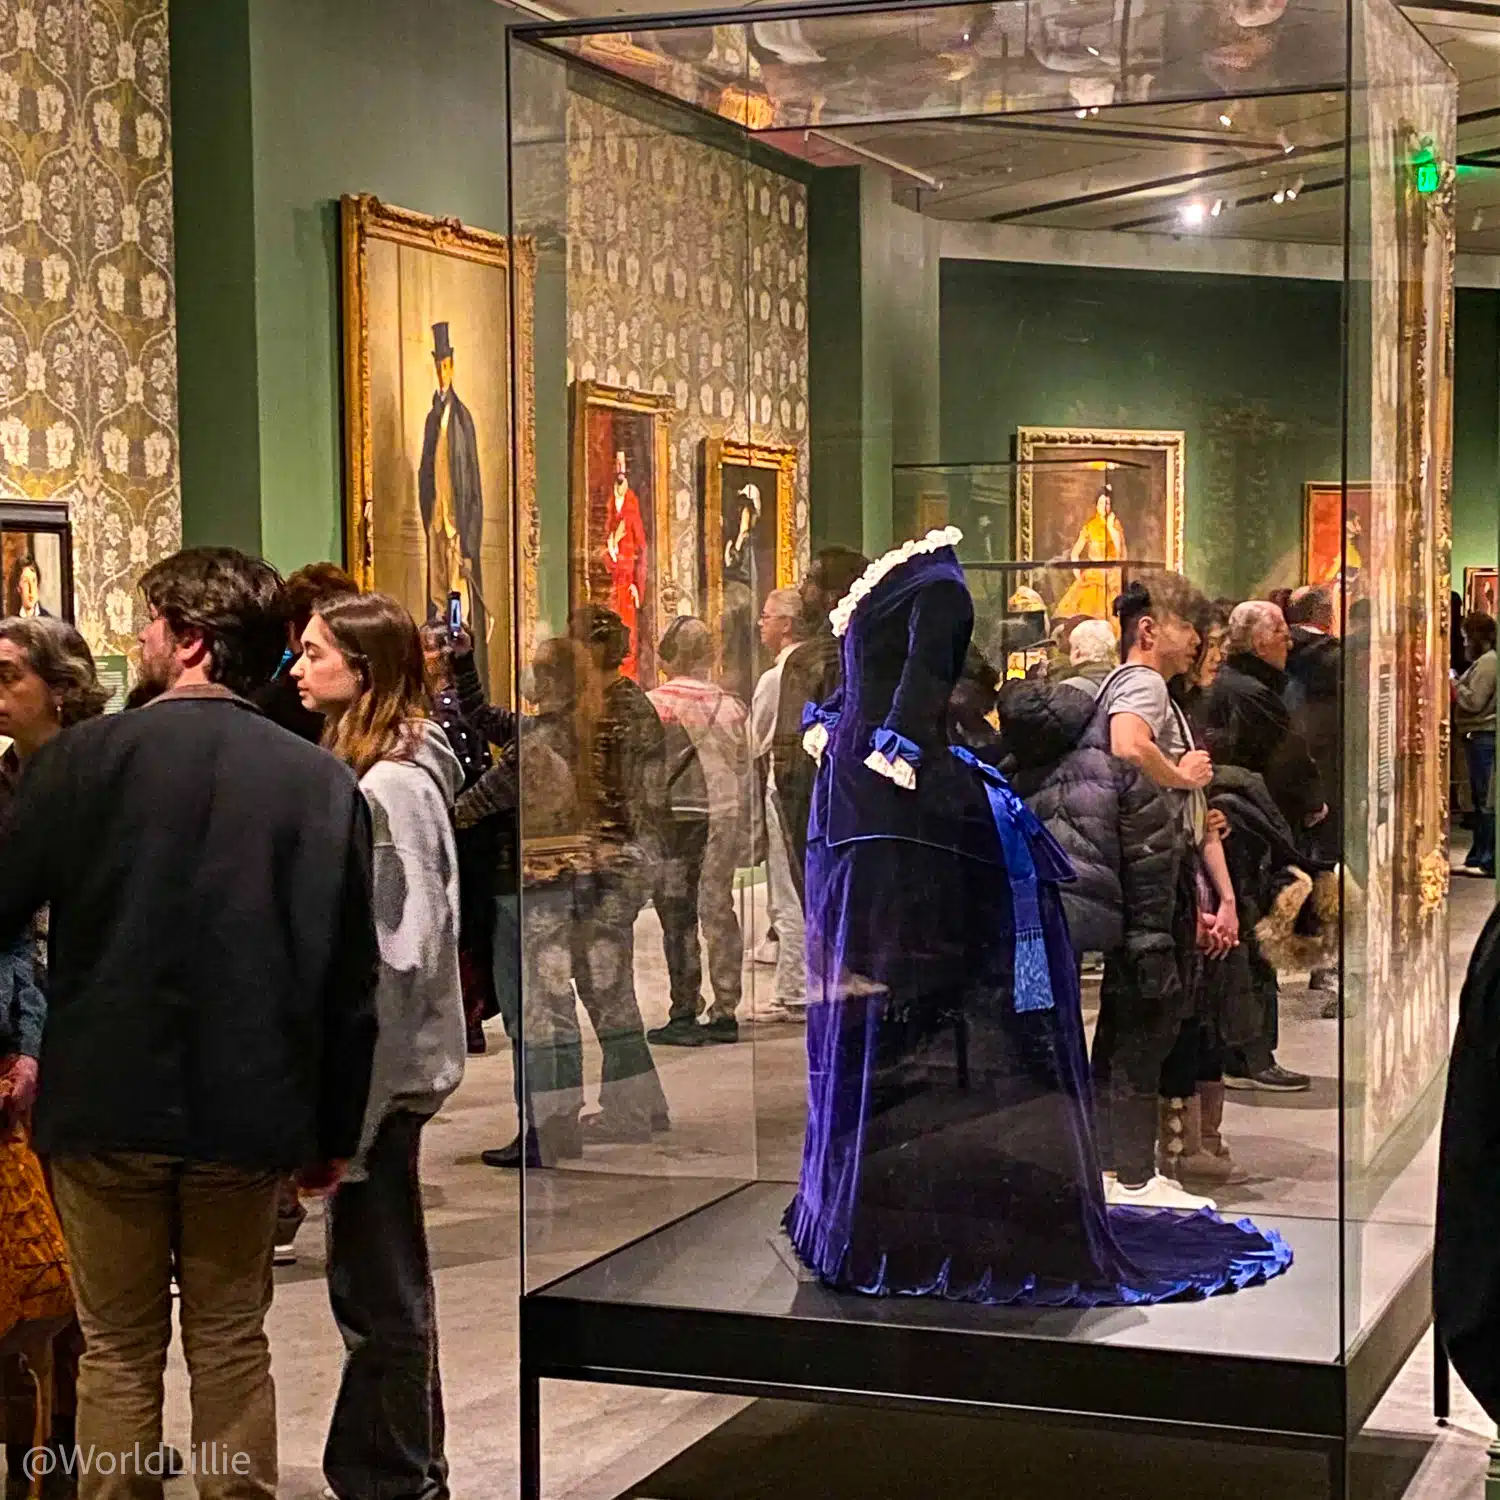 The "Fashioned by Sargent" exhibit was packed!